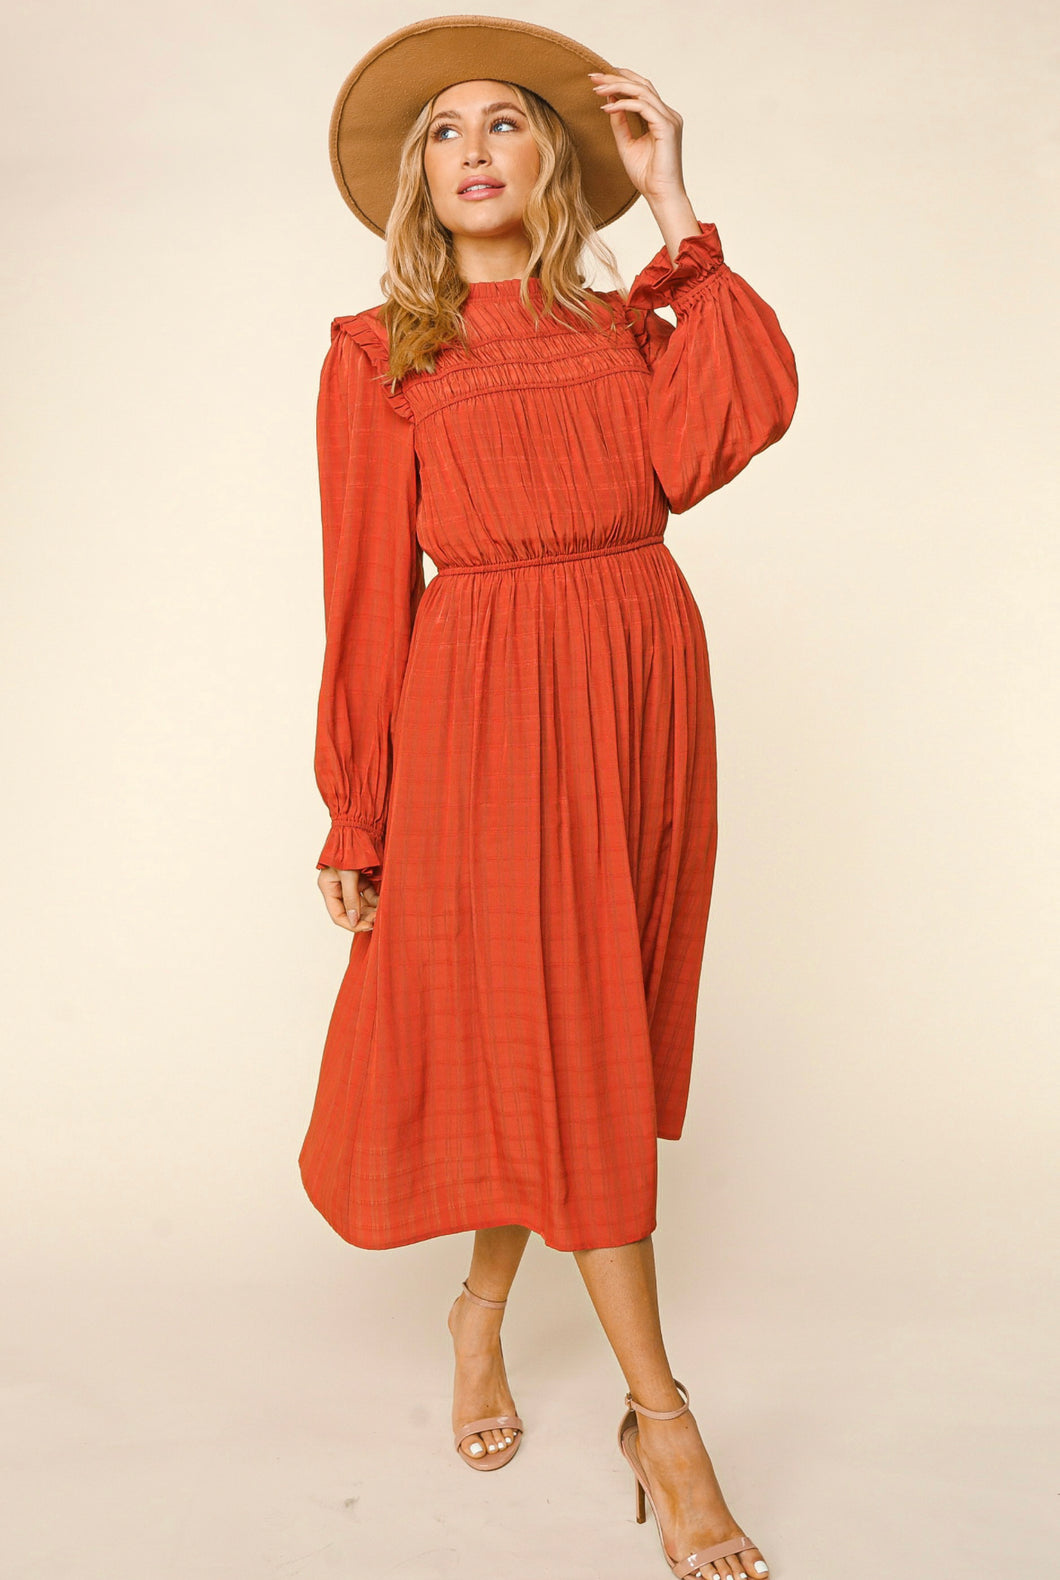 The Fall Pictures Dress -PLUS-